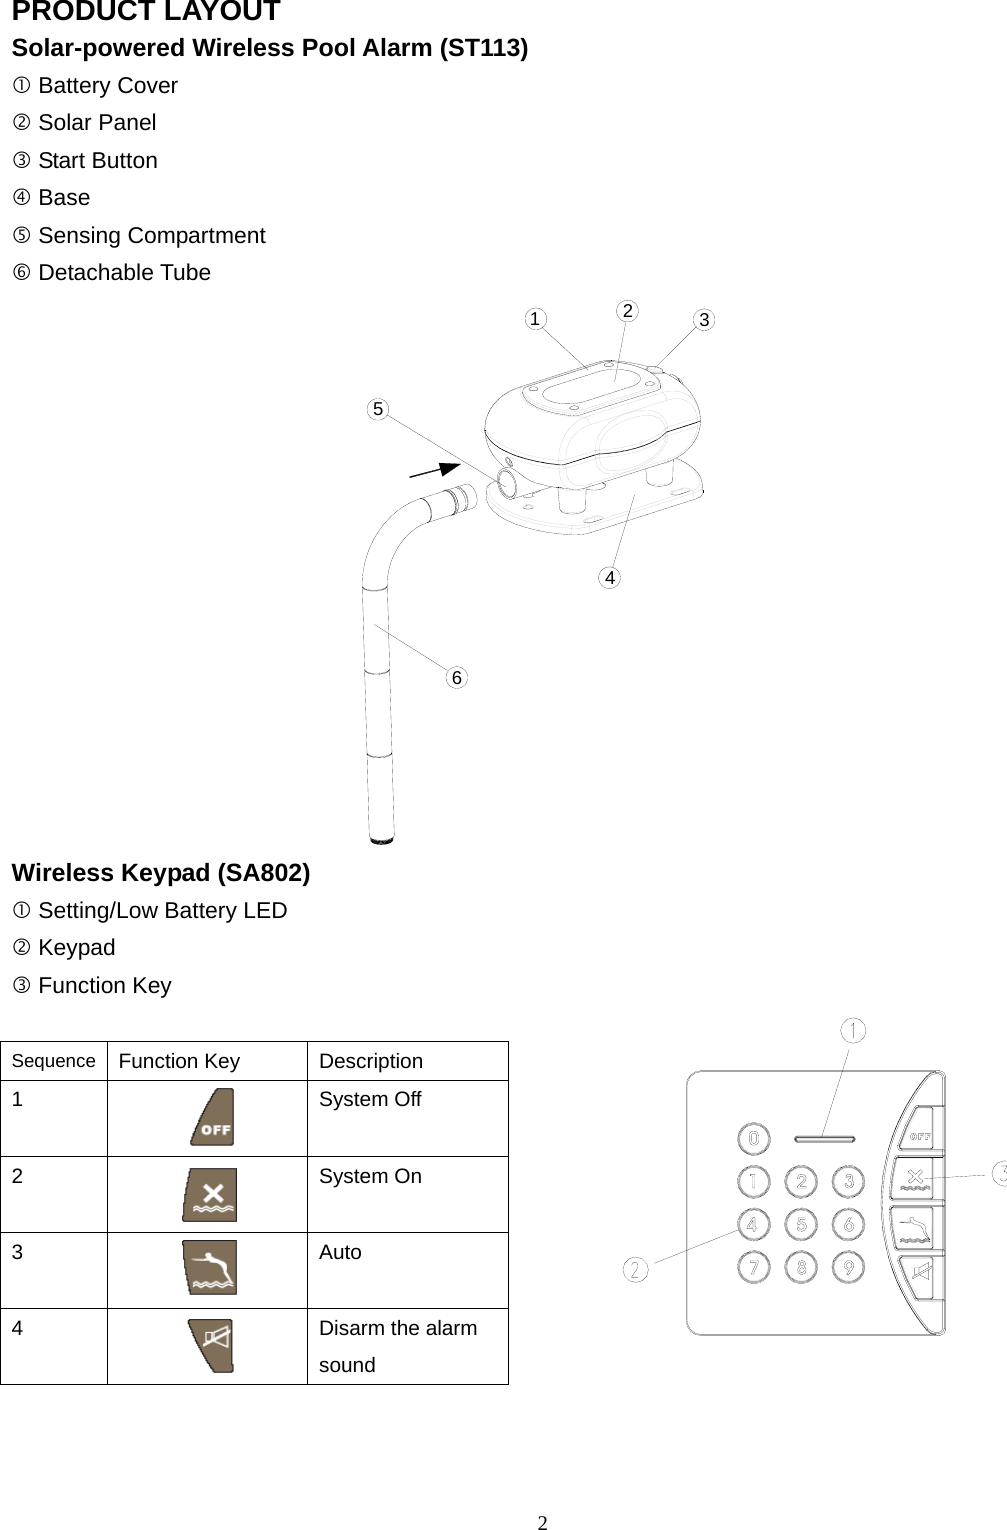 PRODUCT LAYOUT Solar-powered Wireless Pool Alarm (ST113)  Battery Cover  Solar Panel  Start Button  Base  Sensing Compartment  Detachable Tube 312546 Wireless Keypad (SA802)  Setting/Low Battery LED 2  Keypad  Function Key  Sequence  Function Key  Description 1   System Off 2    System On 3    Auto 4    Disarm the alarm sound    